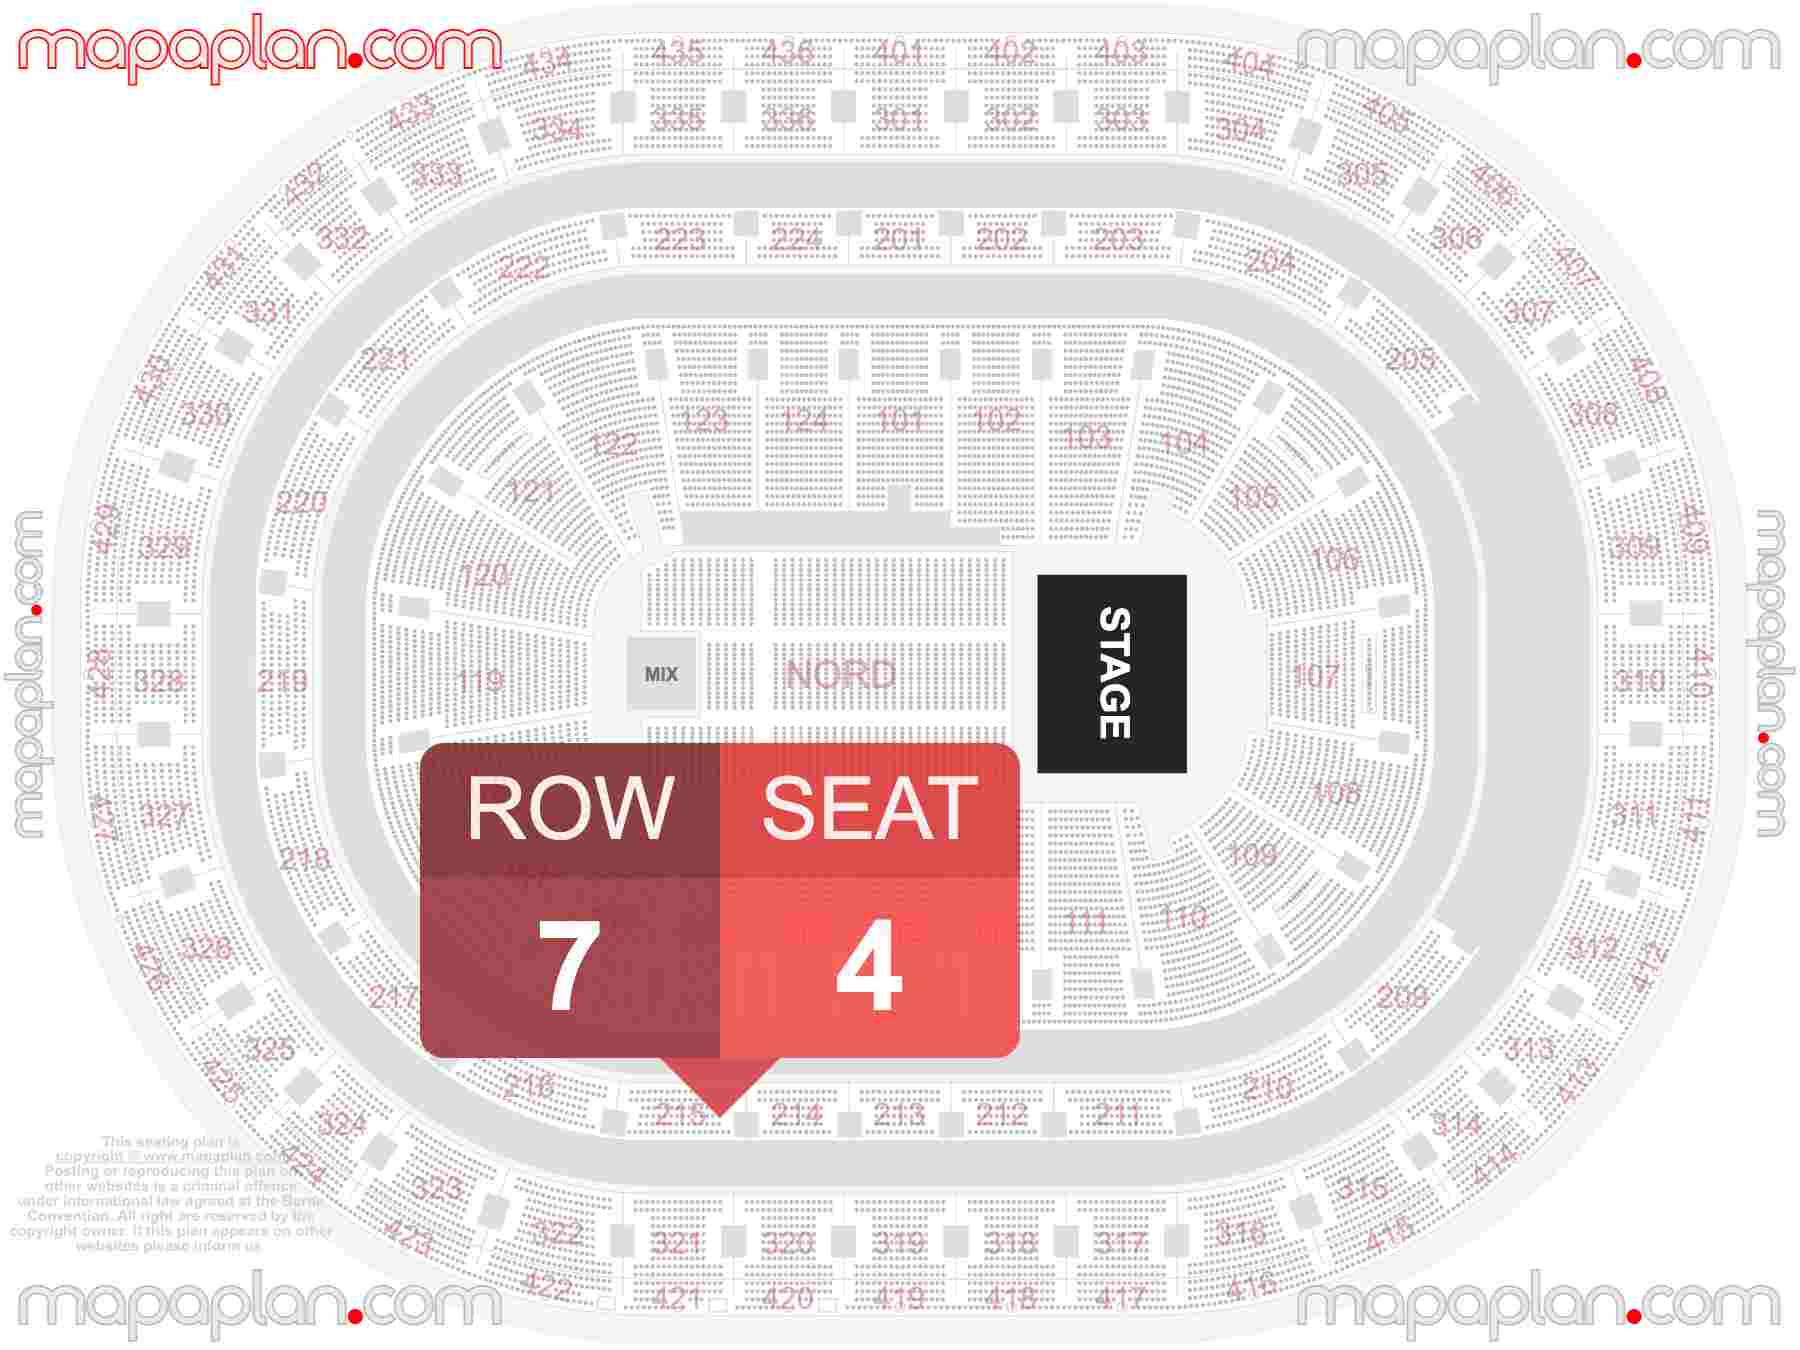 Montreal Bell Centre seating map Concert detailed seat numbers and row numbering map with interactive map chart layout